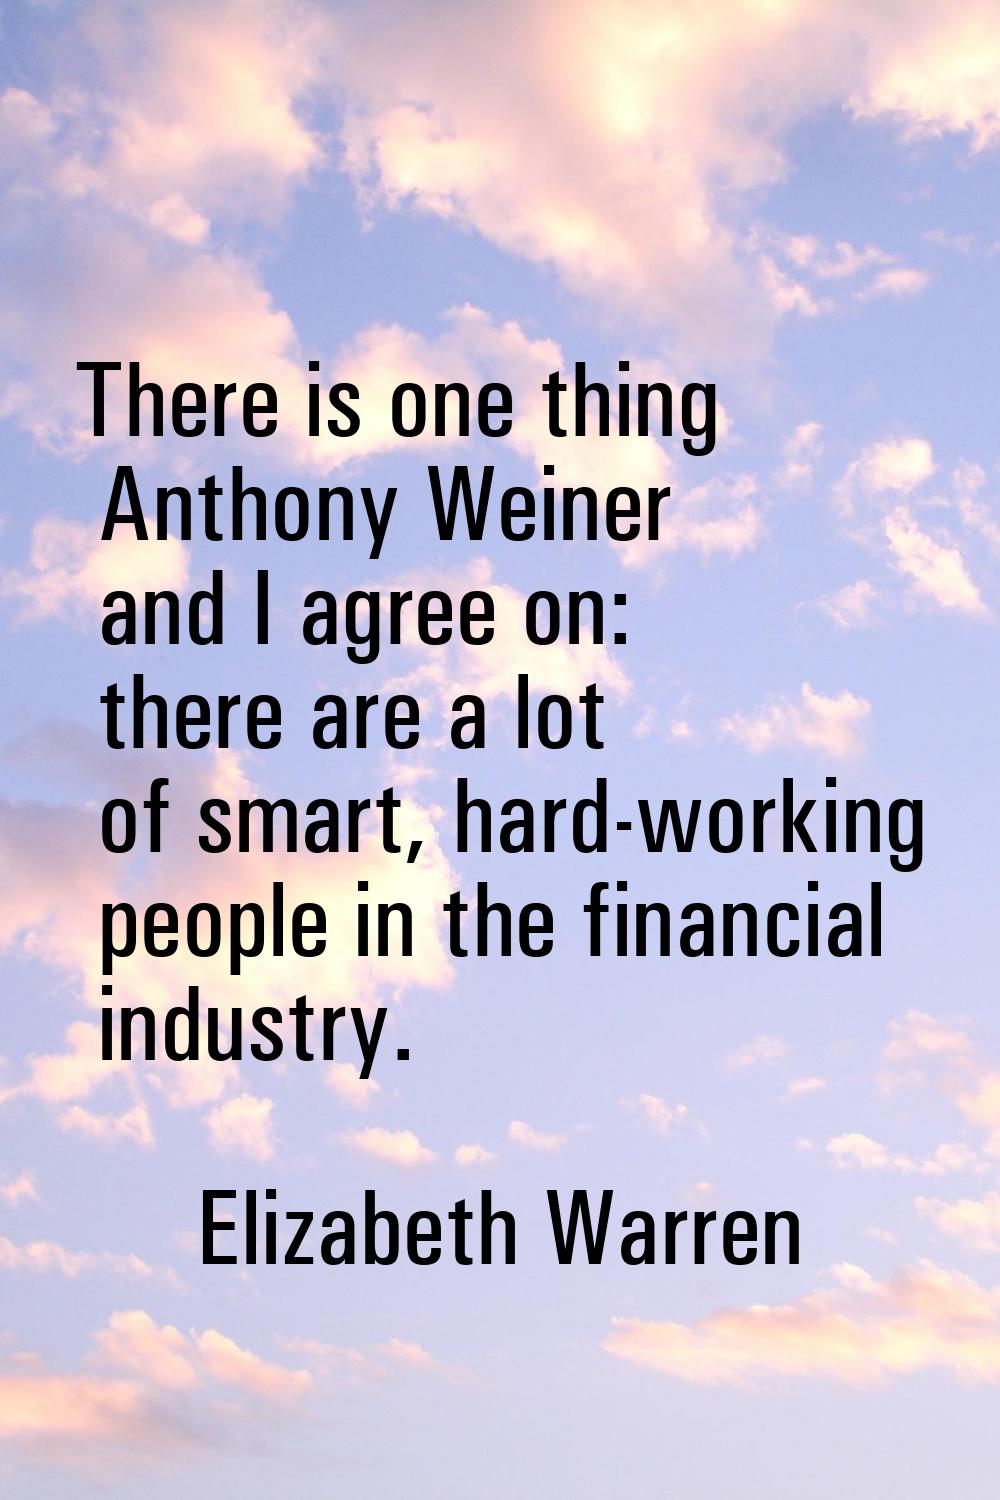 There is one thing Anthony Weiner and I agree on: there are a lot of smart, hard-working people in 